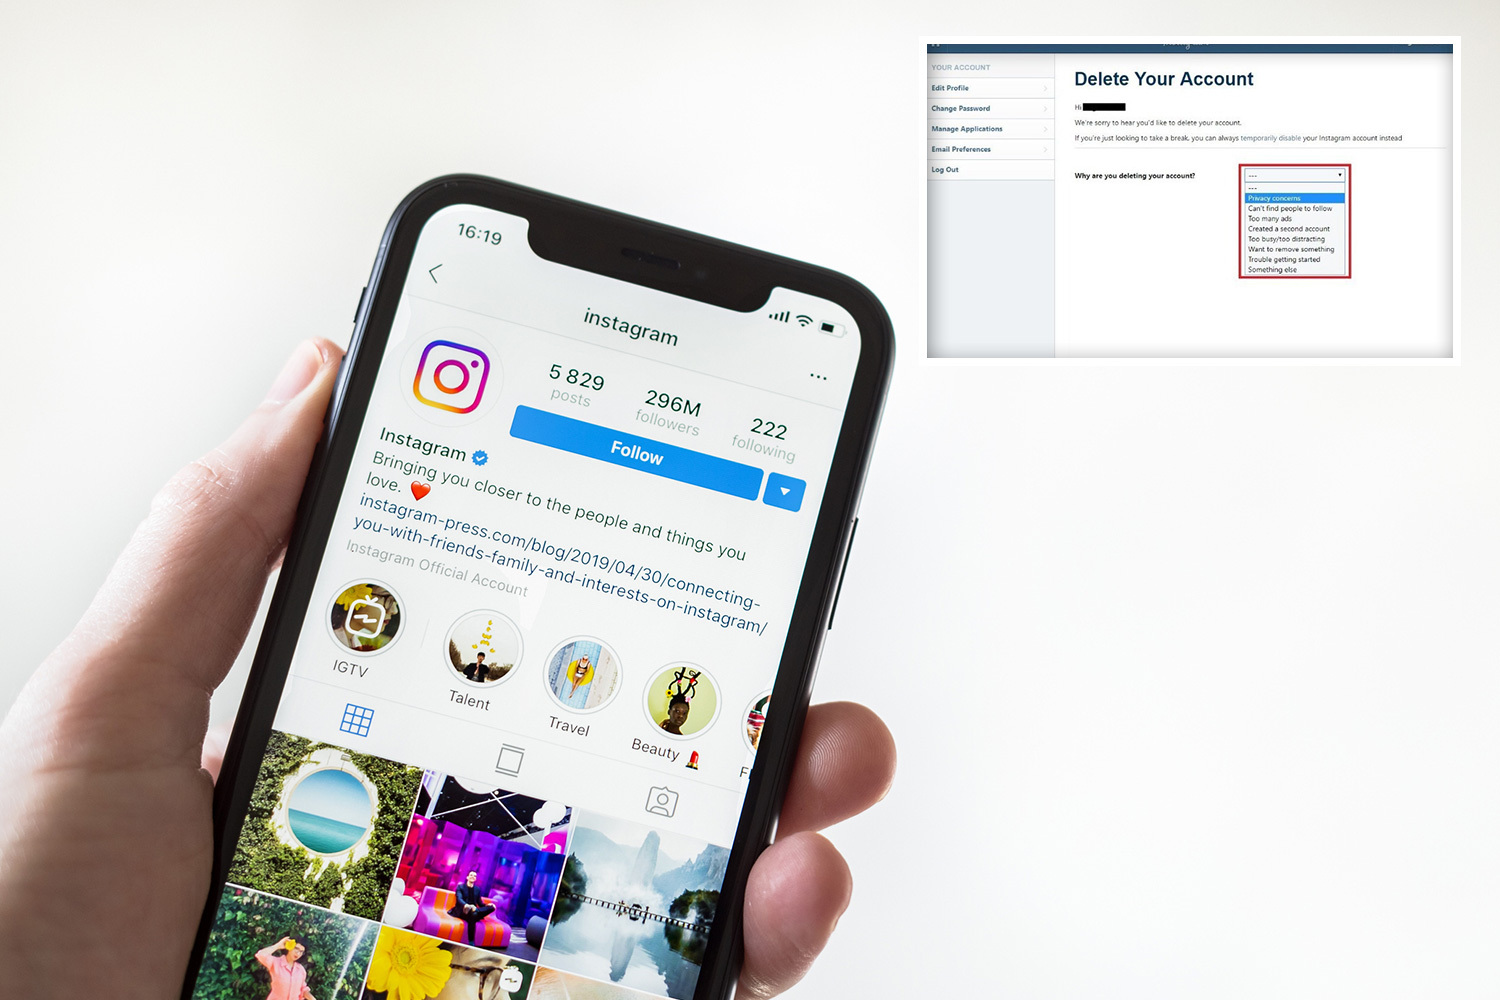 How to disable your Instagram account on iPhone step by step – The Sun